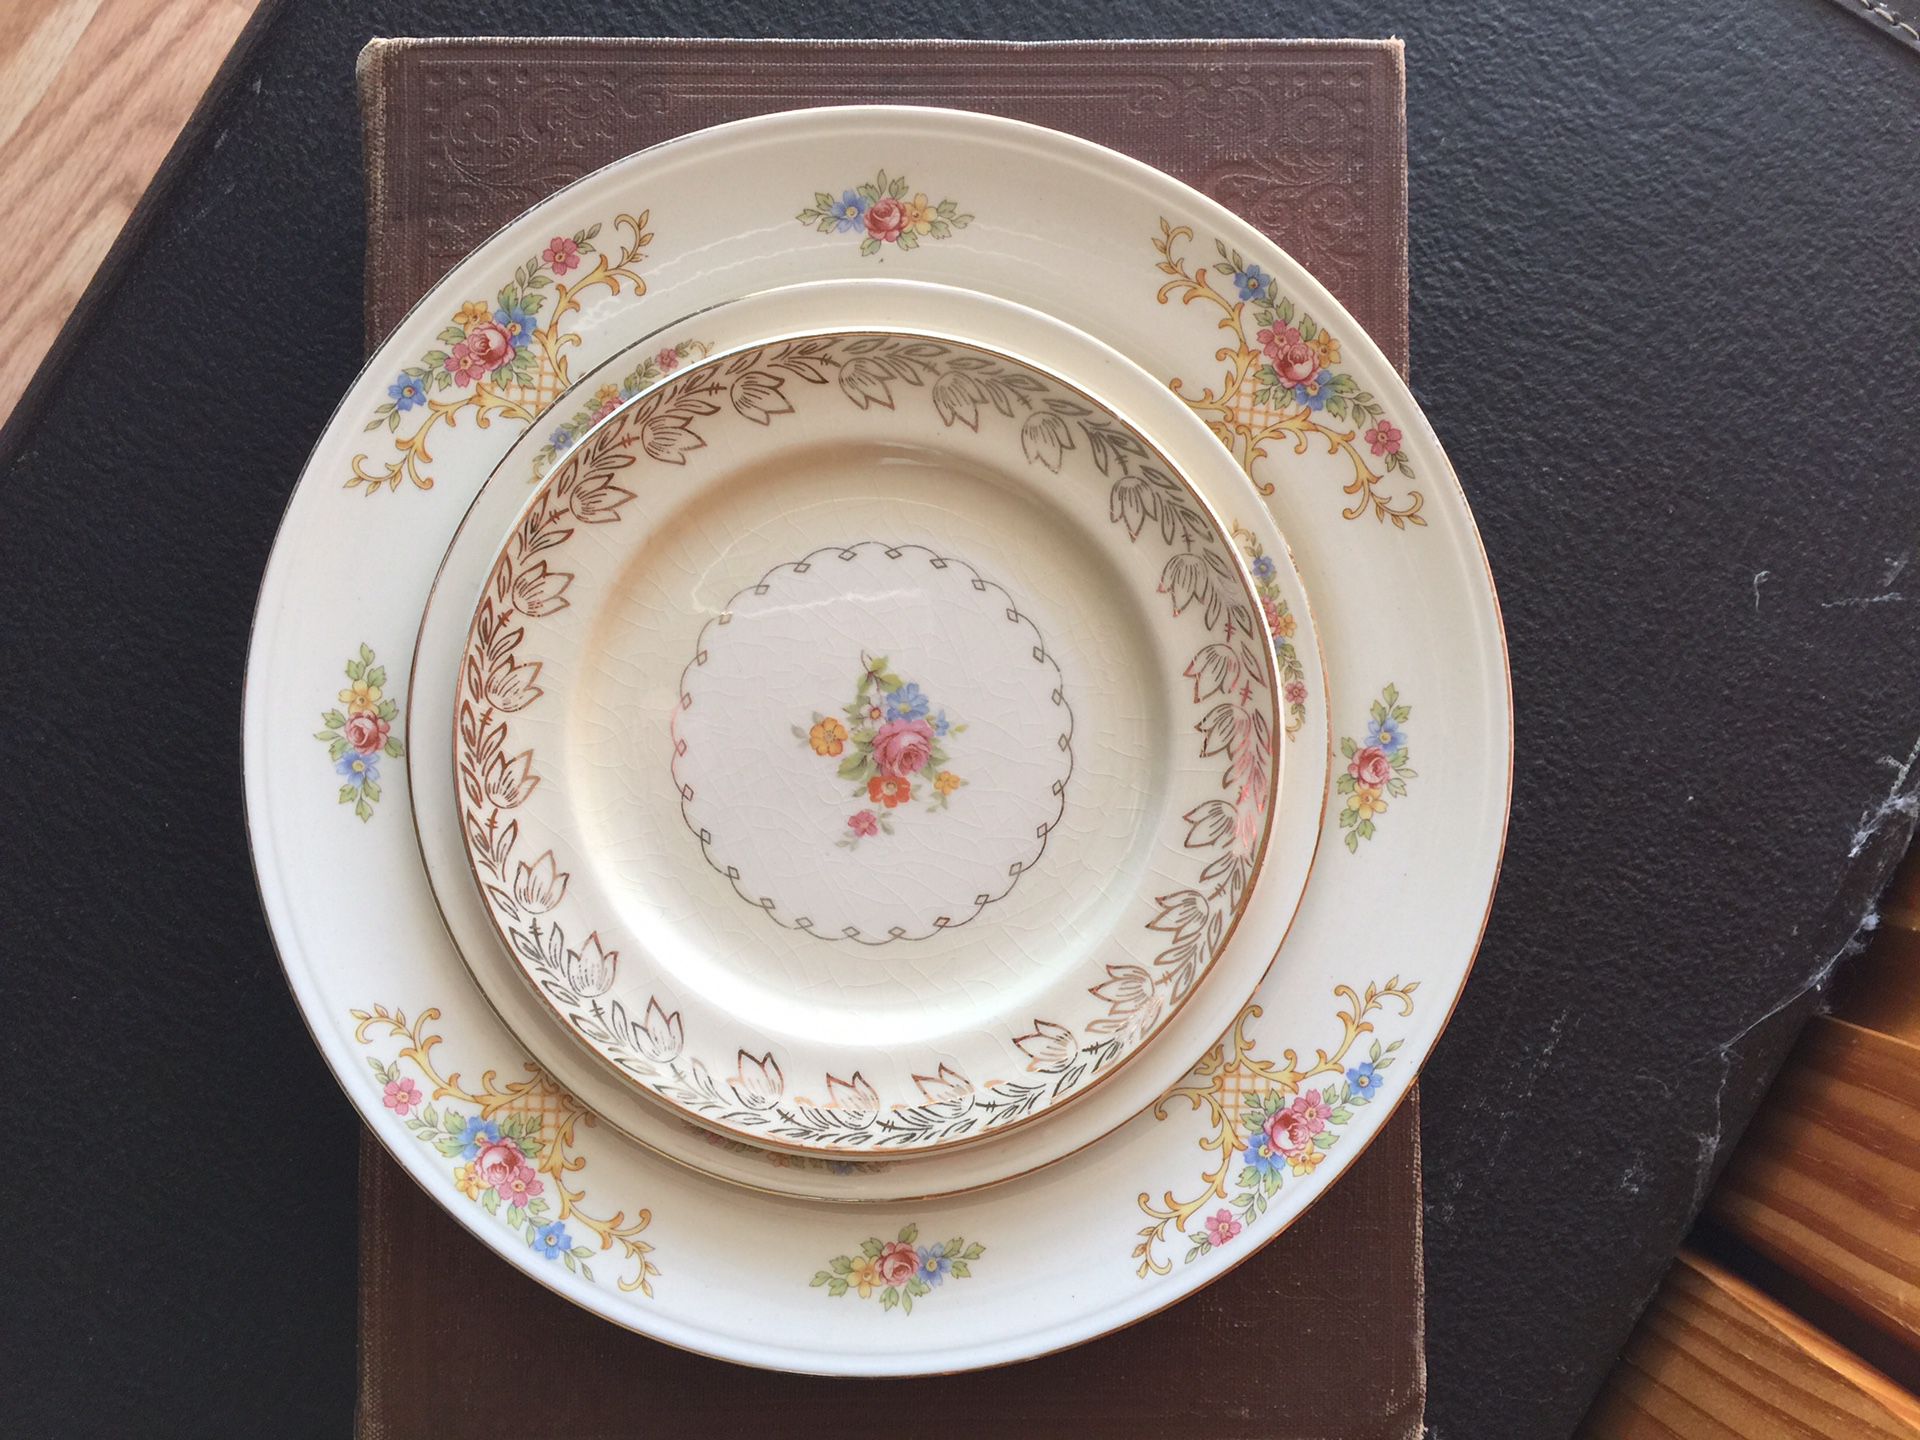 Vintage china place settings